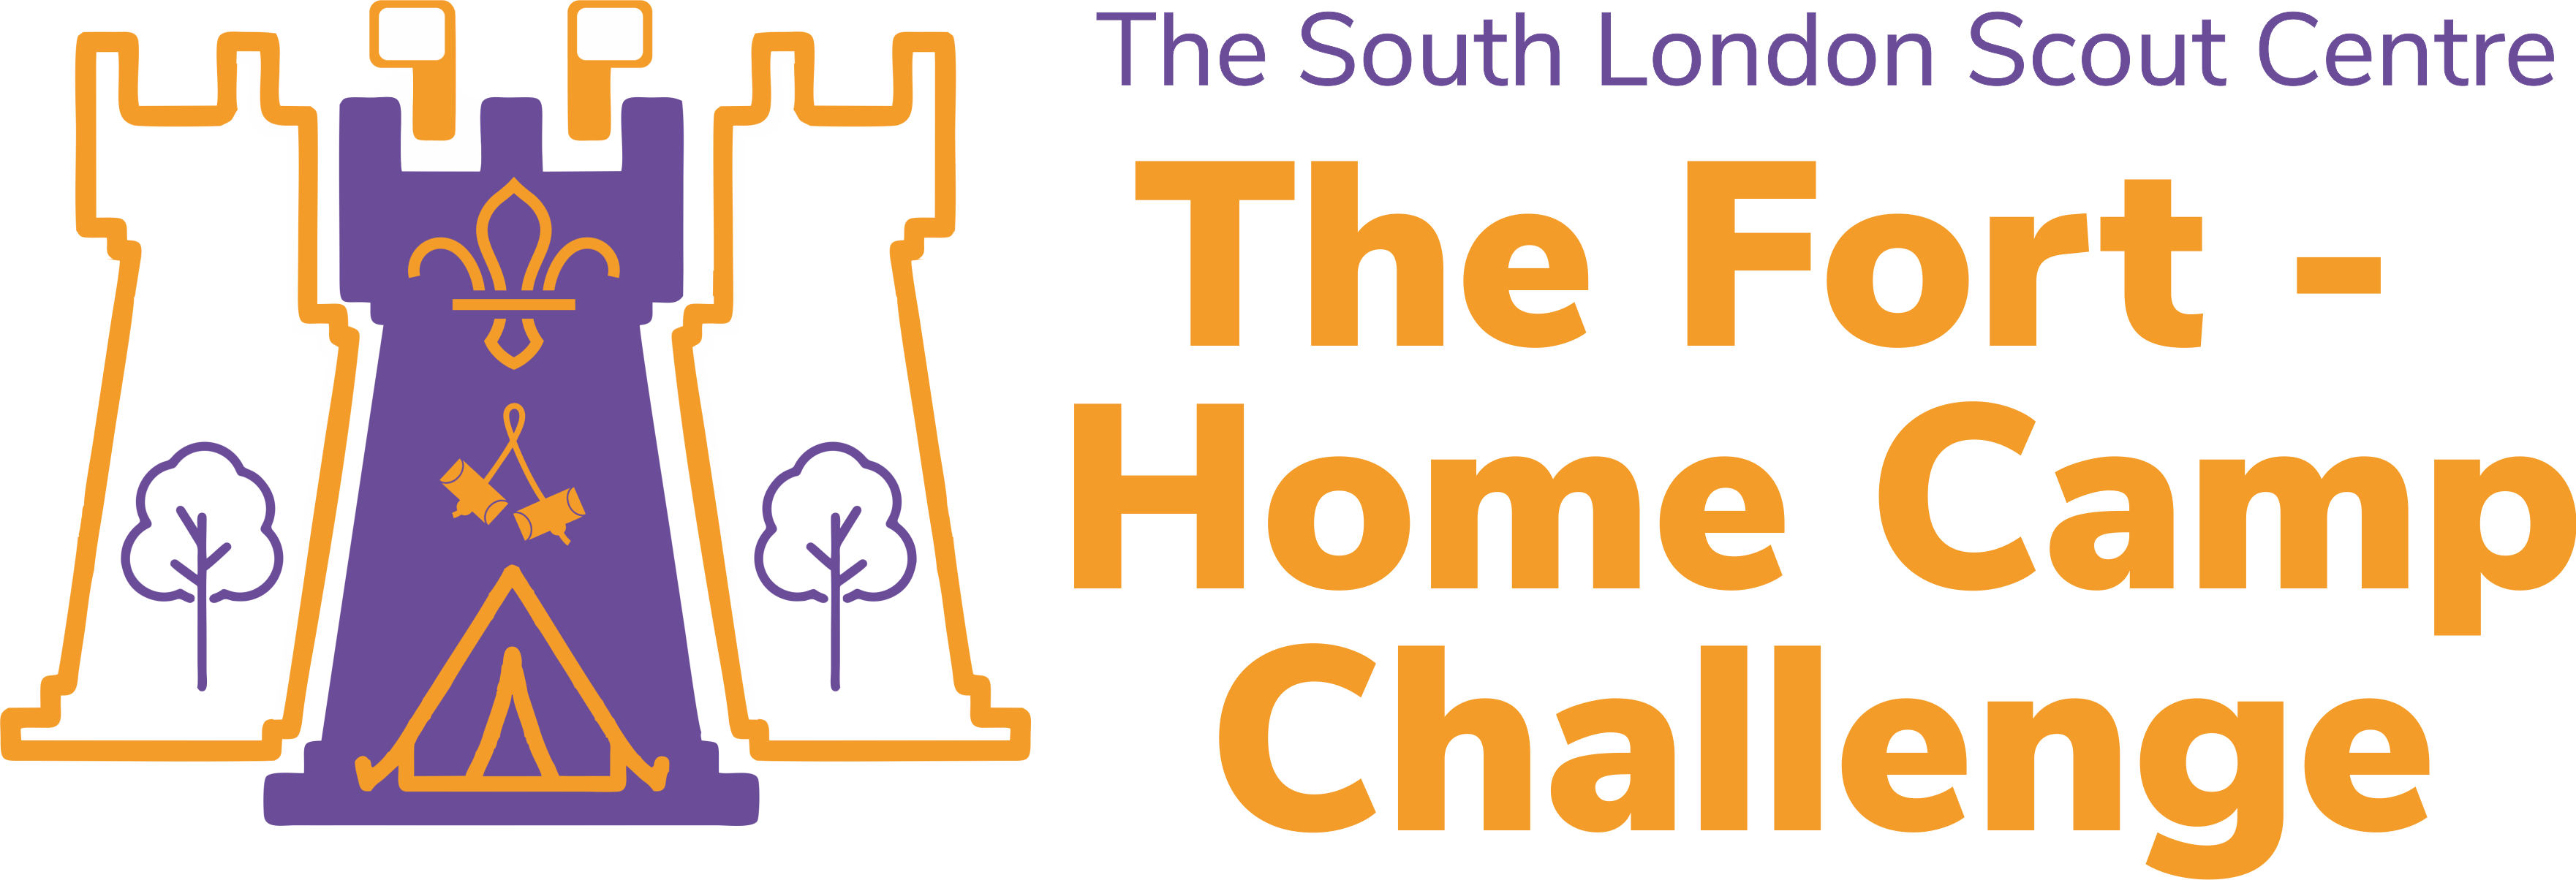 The Fort - home camp challenge banner